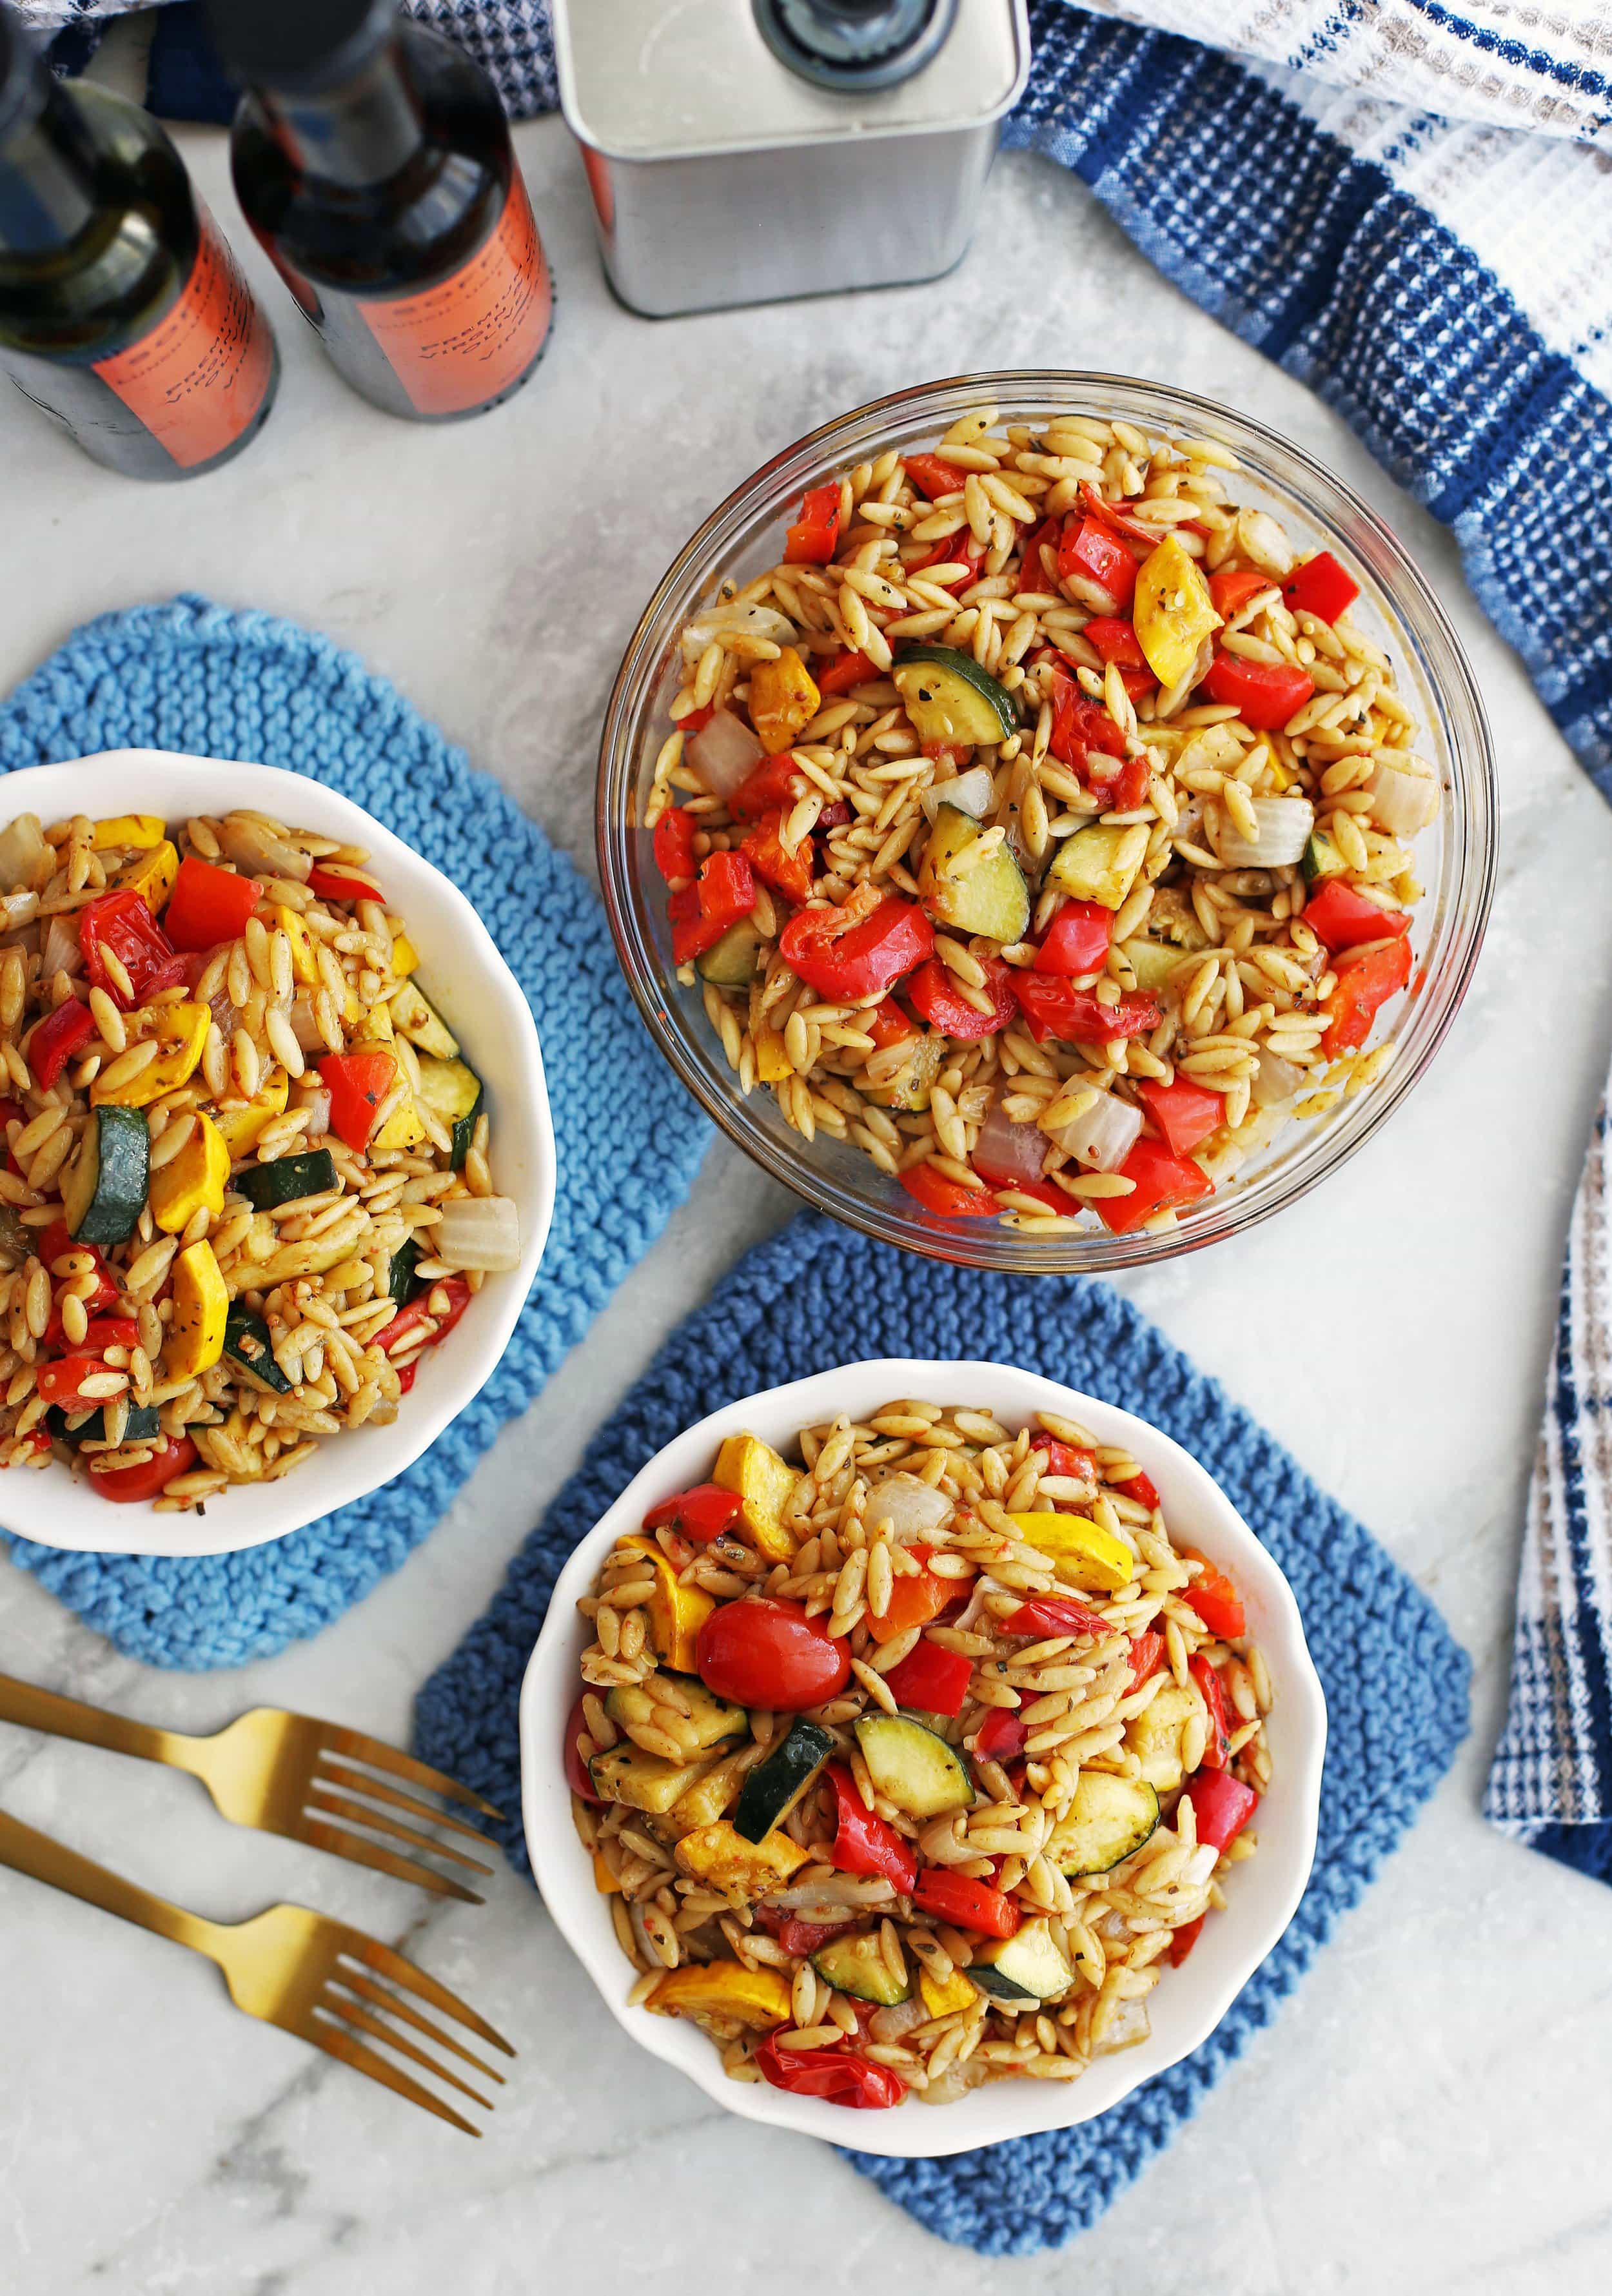 Three bowls containing colourful roasted summer vegetable and orzo pasta salad with Dijon-balsamic vinaigrette.